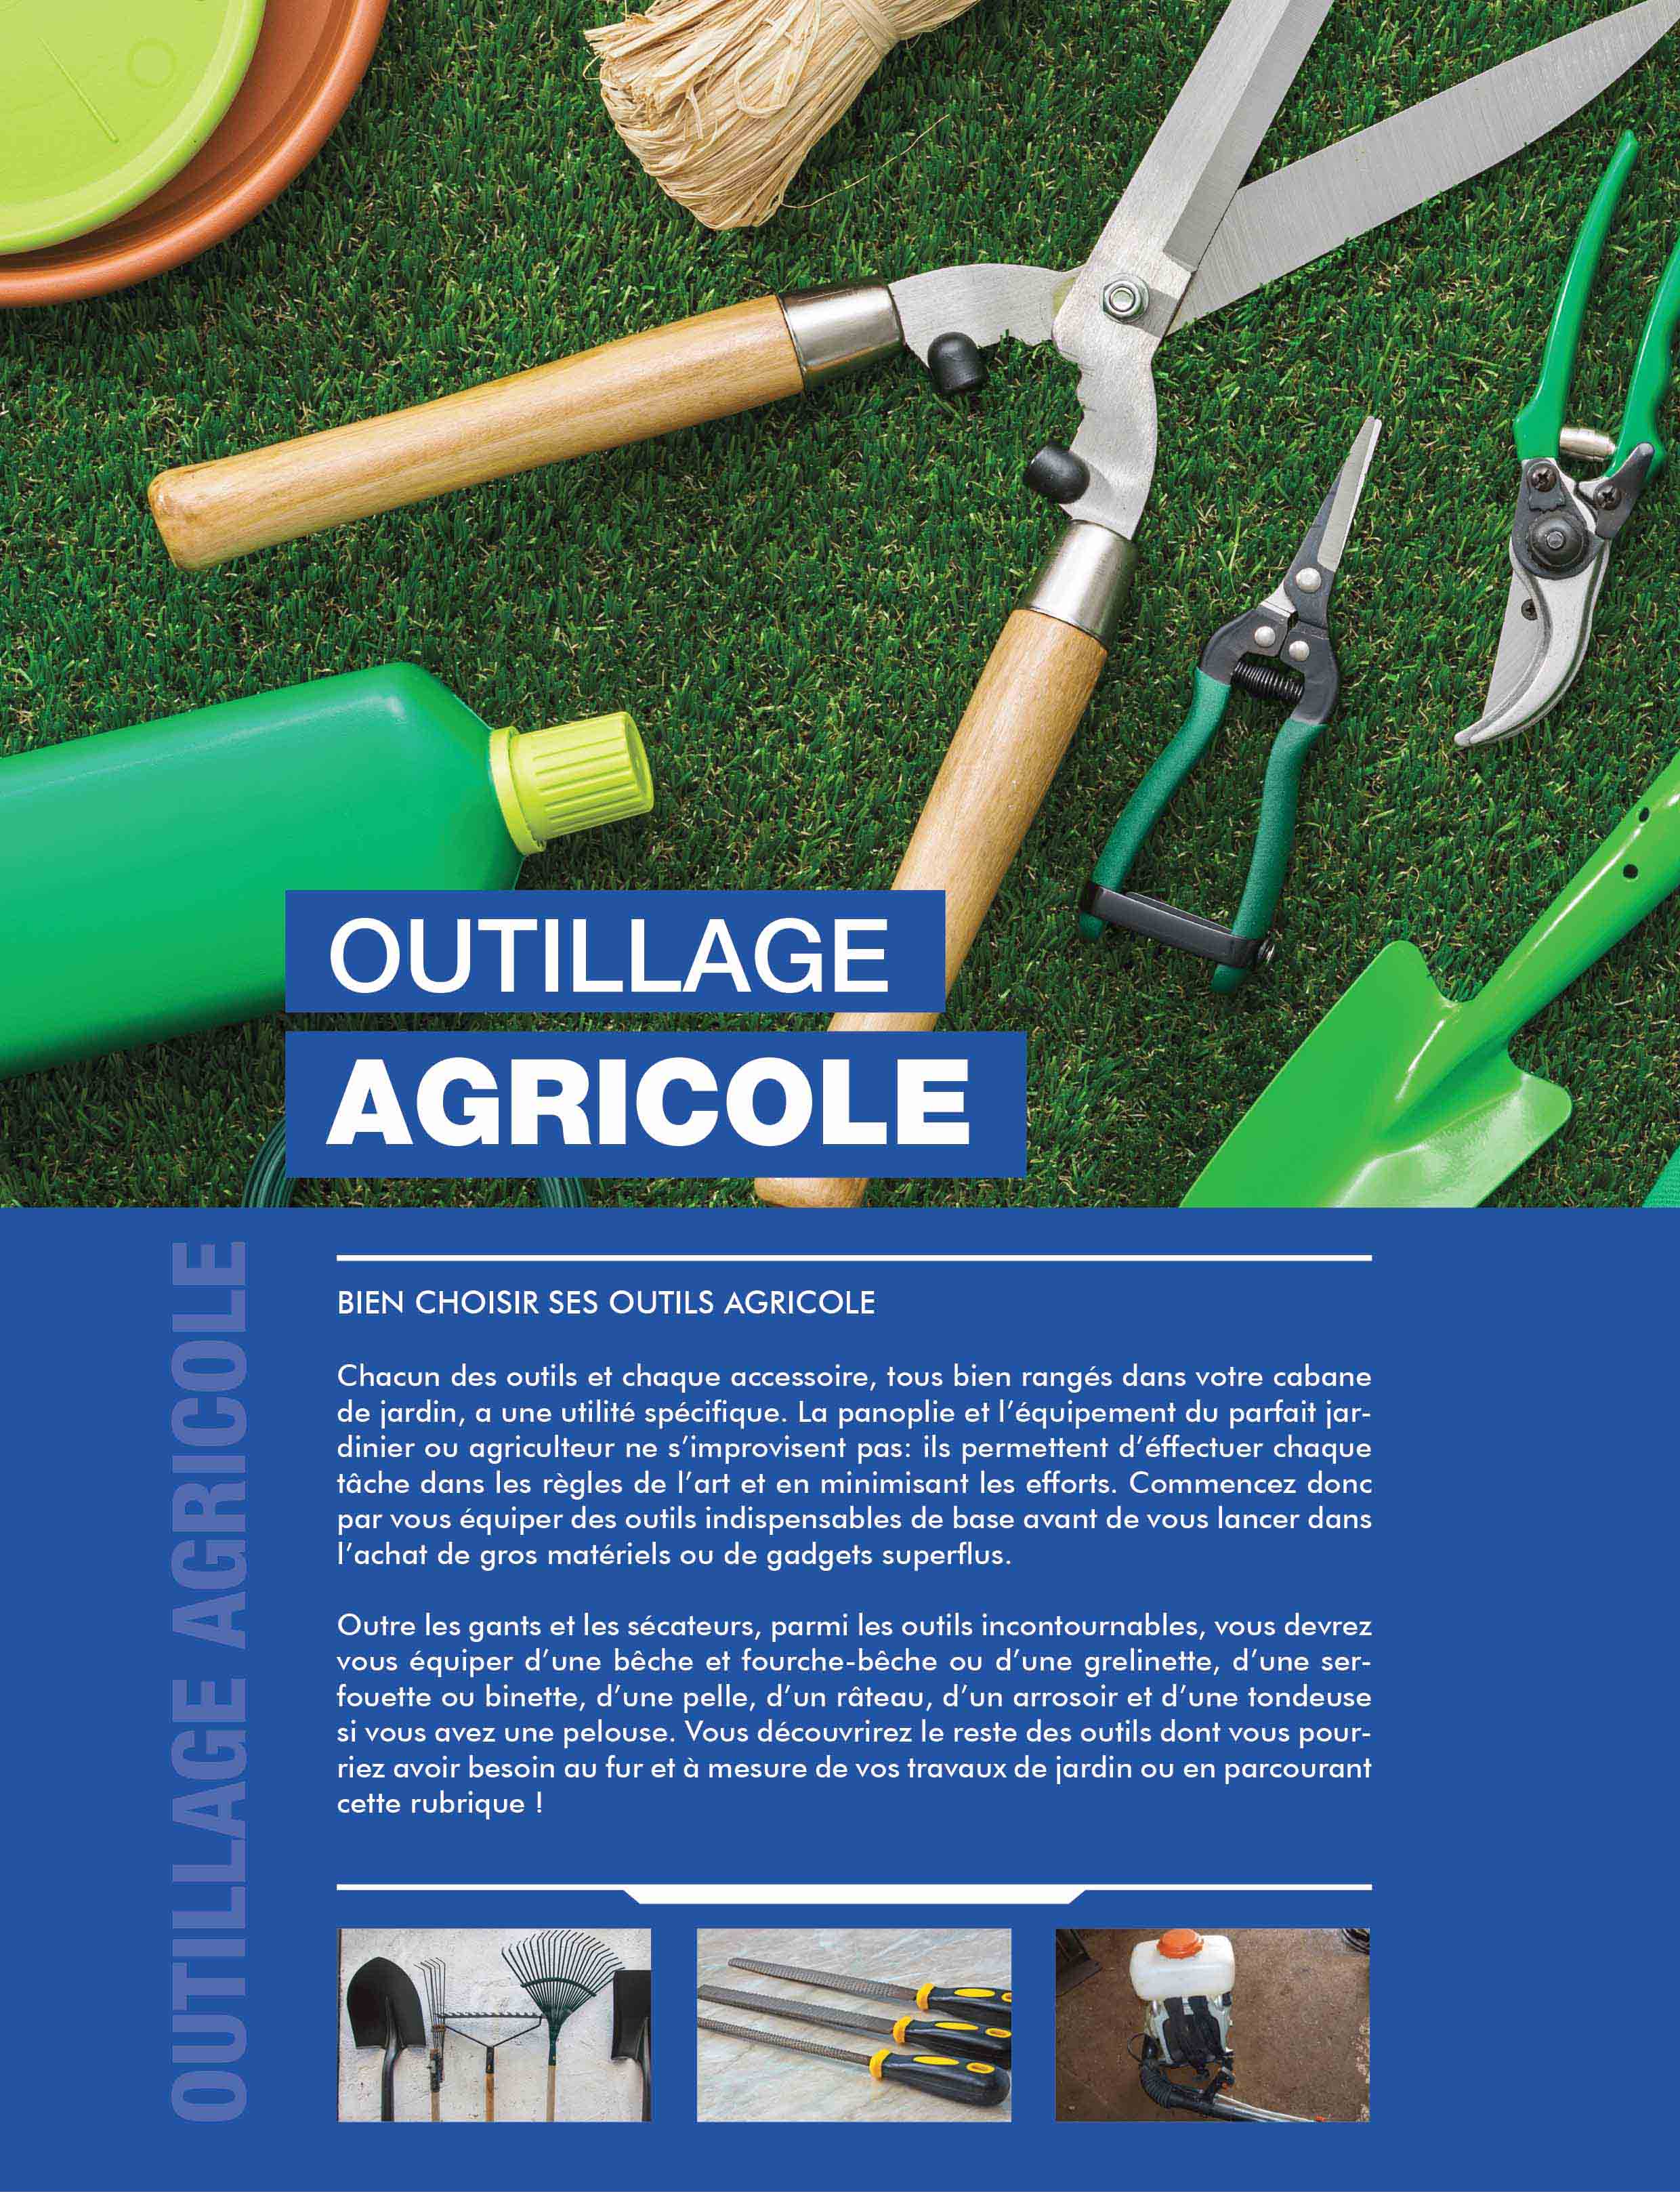 Outillage Agricole image